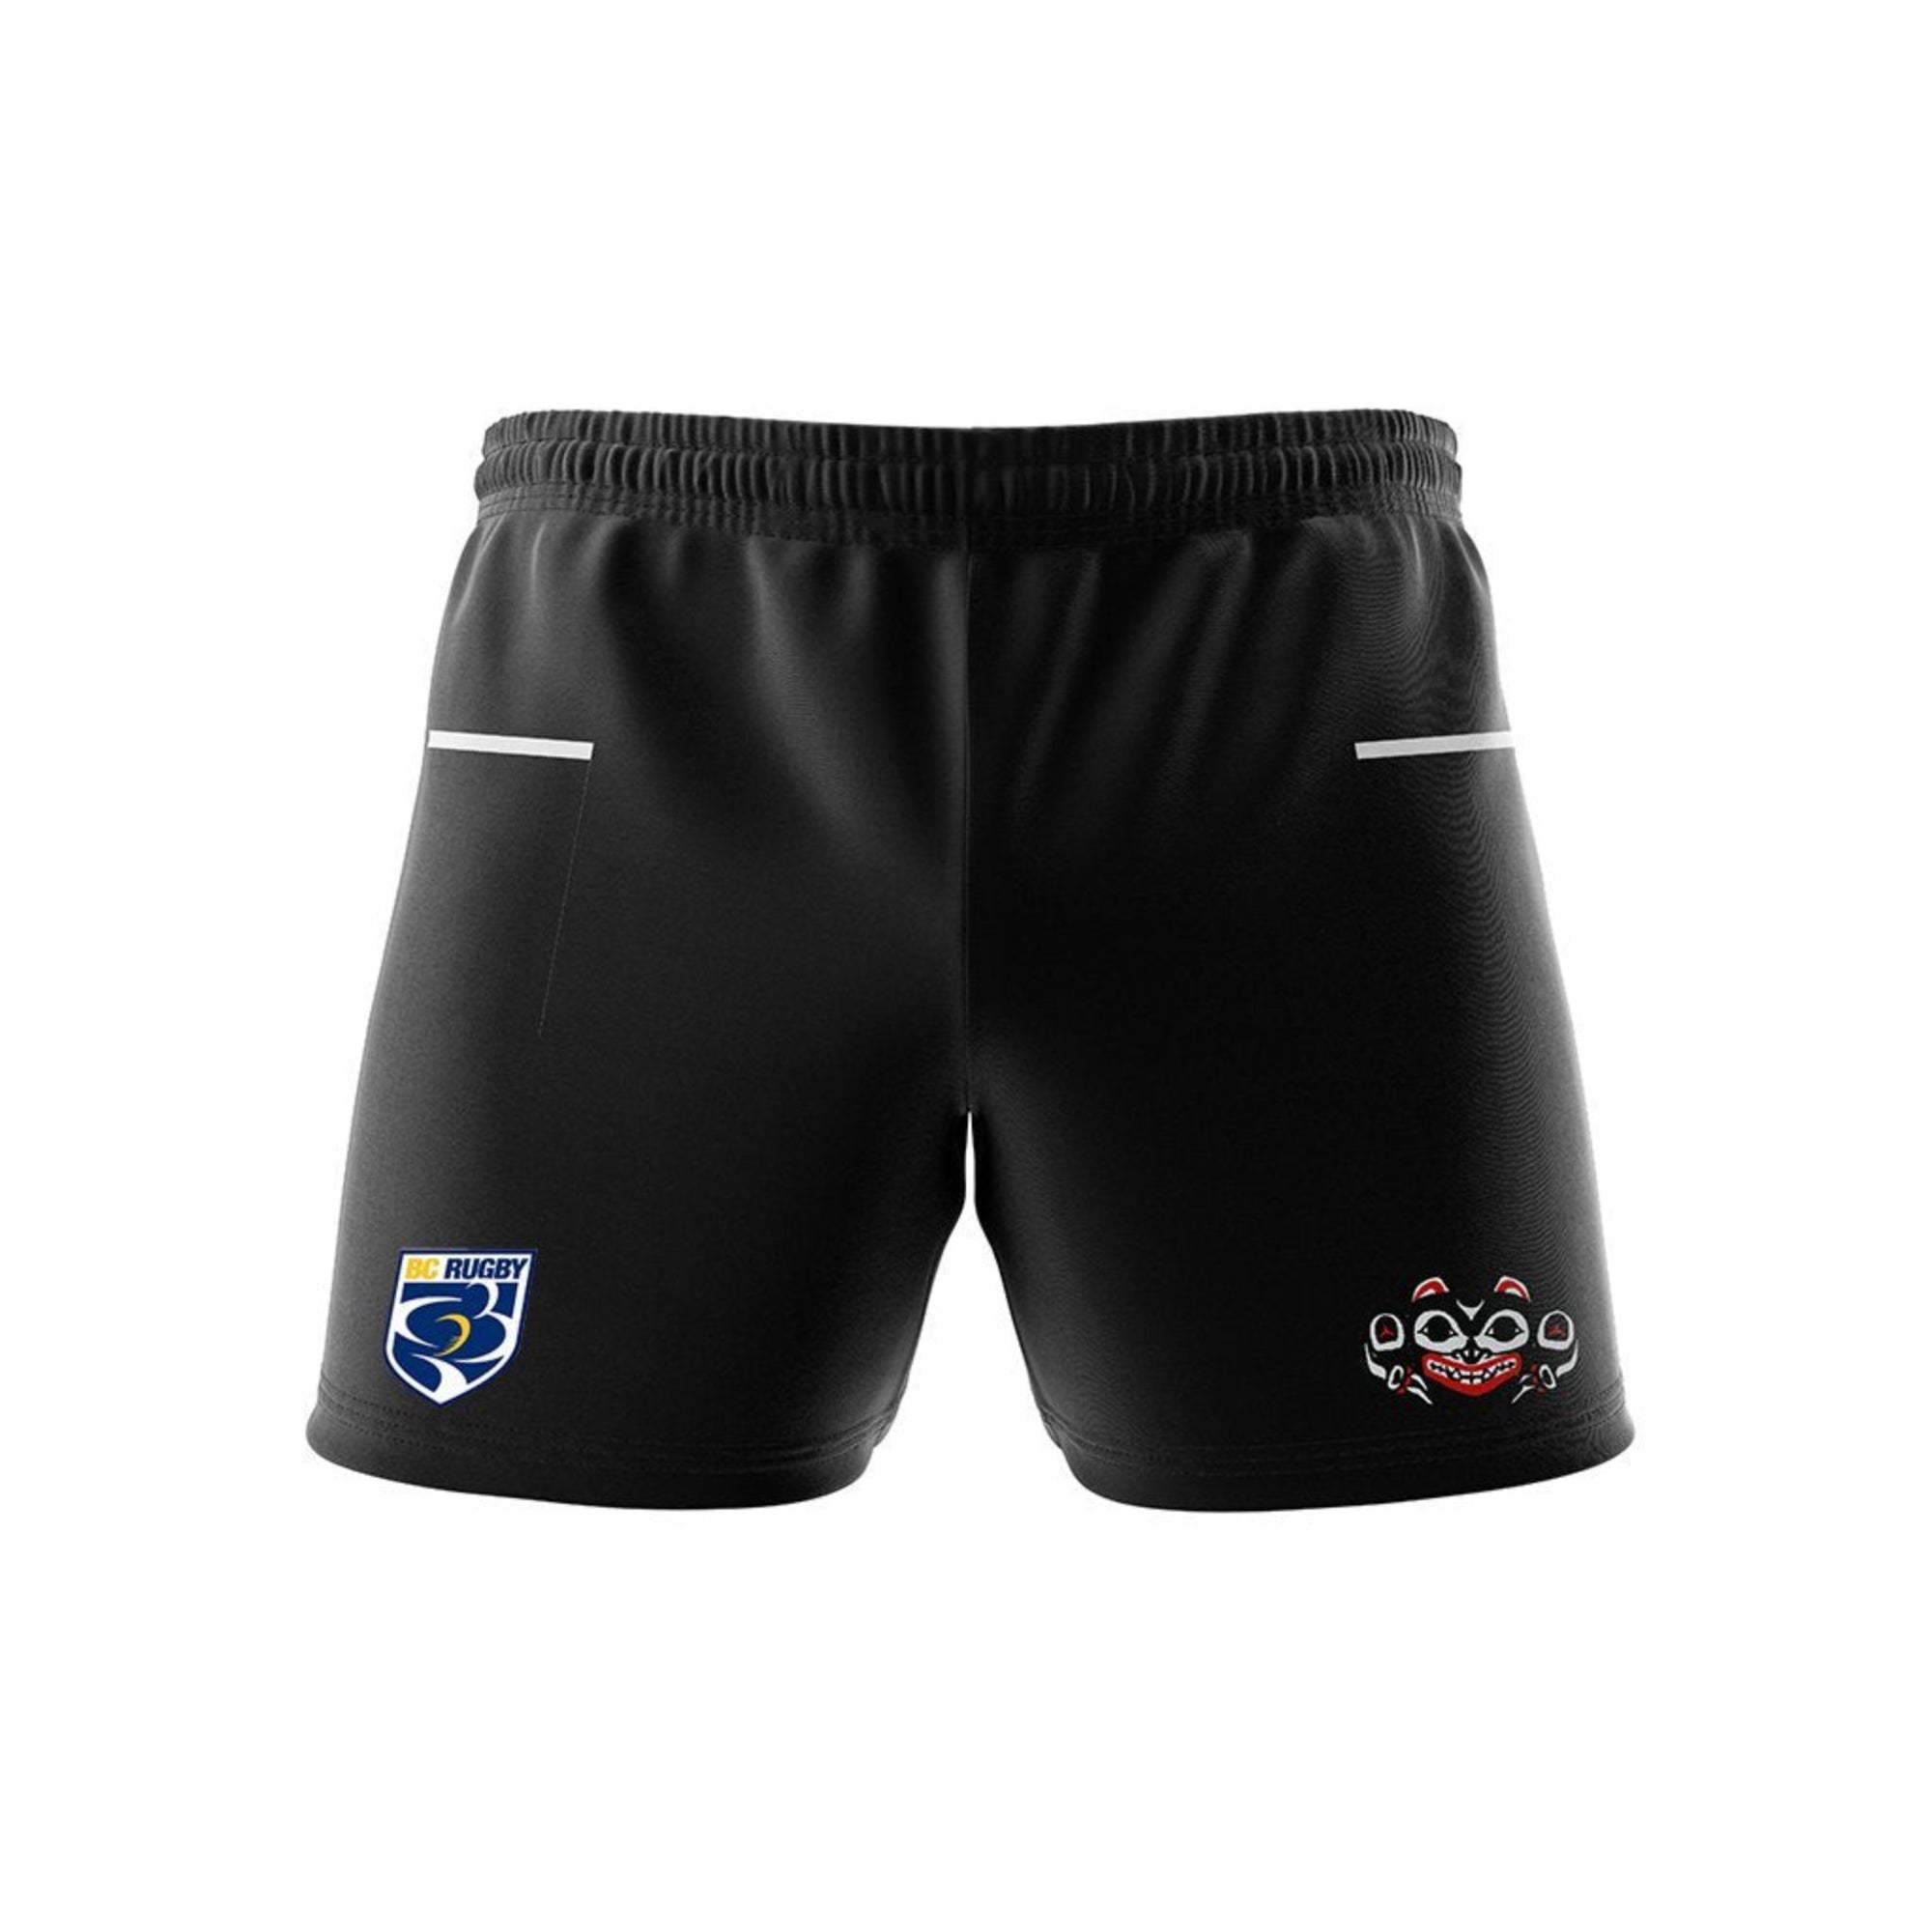 BCRRS Pro Pocketed Ref Shorts - www.therugbyshop.com www.therugbyshop.com ADULT UNISEX / Black / XS KONNO SHORTS BCRRS Pro Pocketed Ref Shorts